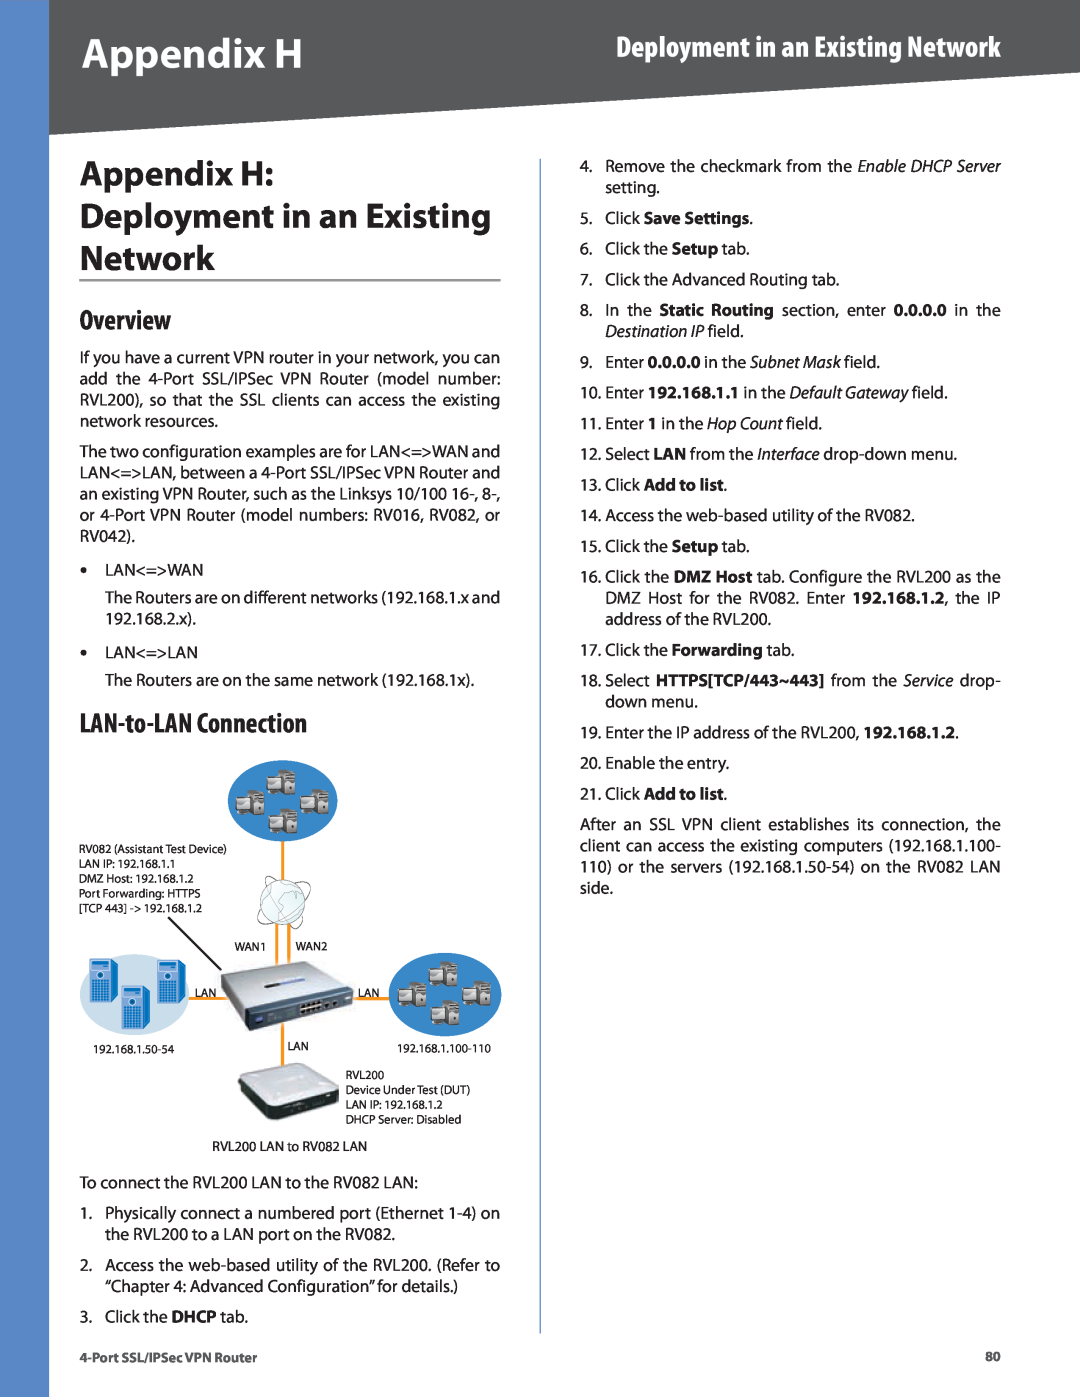 Cisco Systems RVL200 manual Appendix H Deployment in an Existing Network, LAN-to-LAN Connection, Click Save Settings 